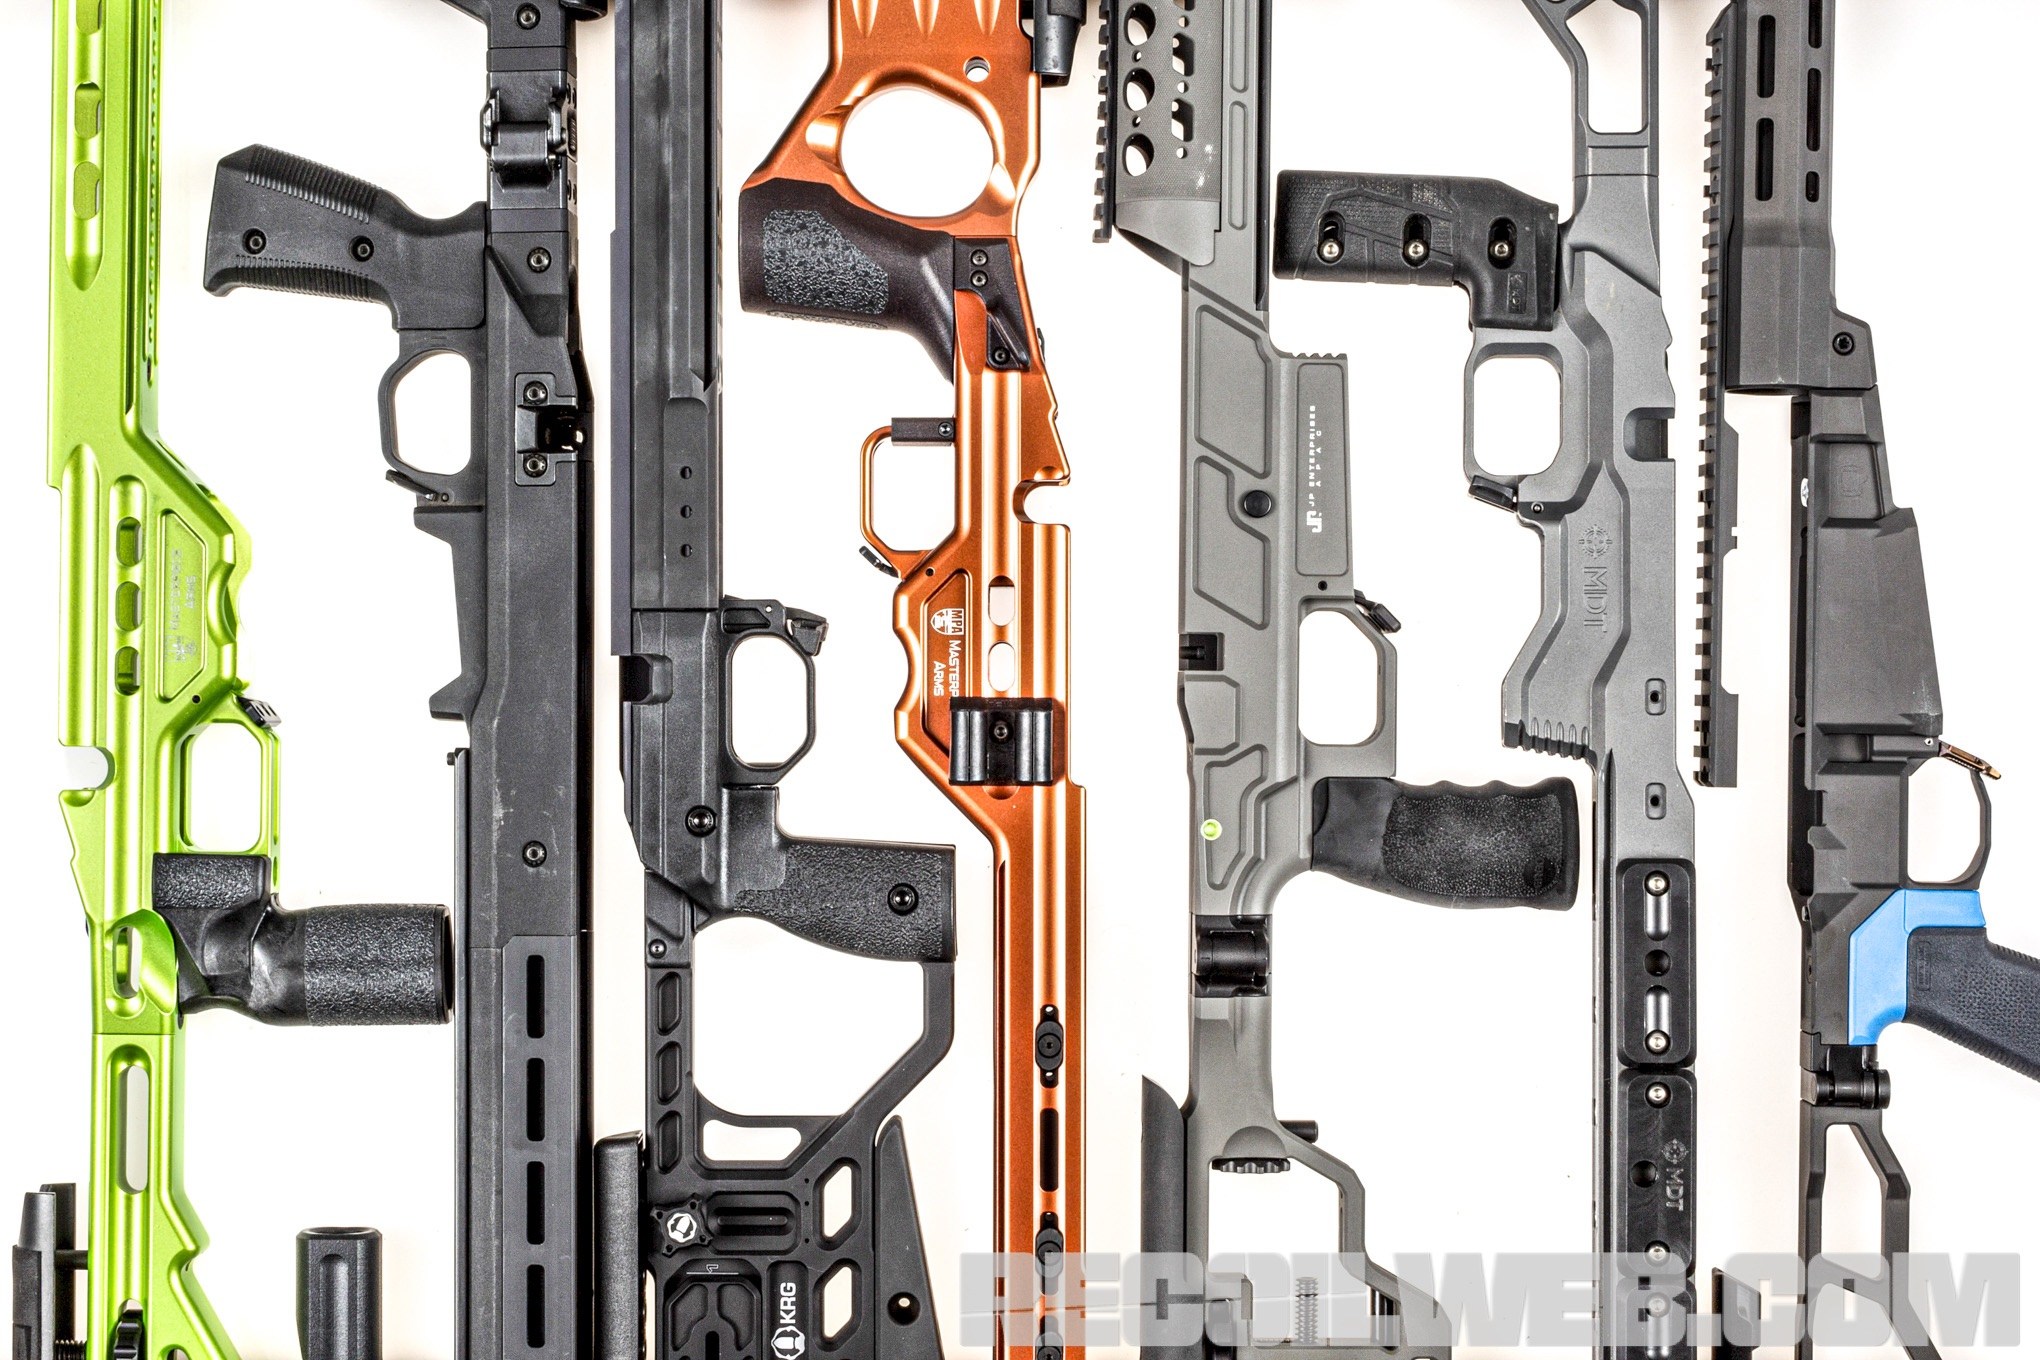 The Shooting Guys - TSG is now taking orders for the new MDT Elite